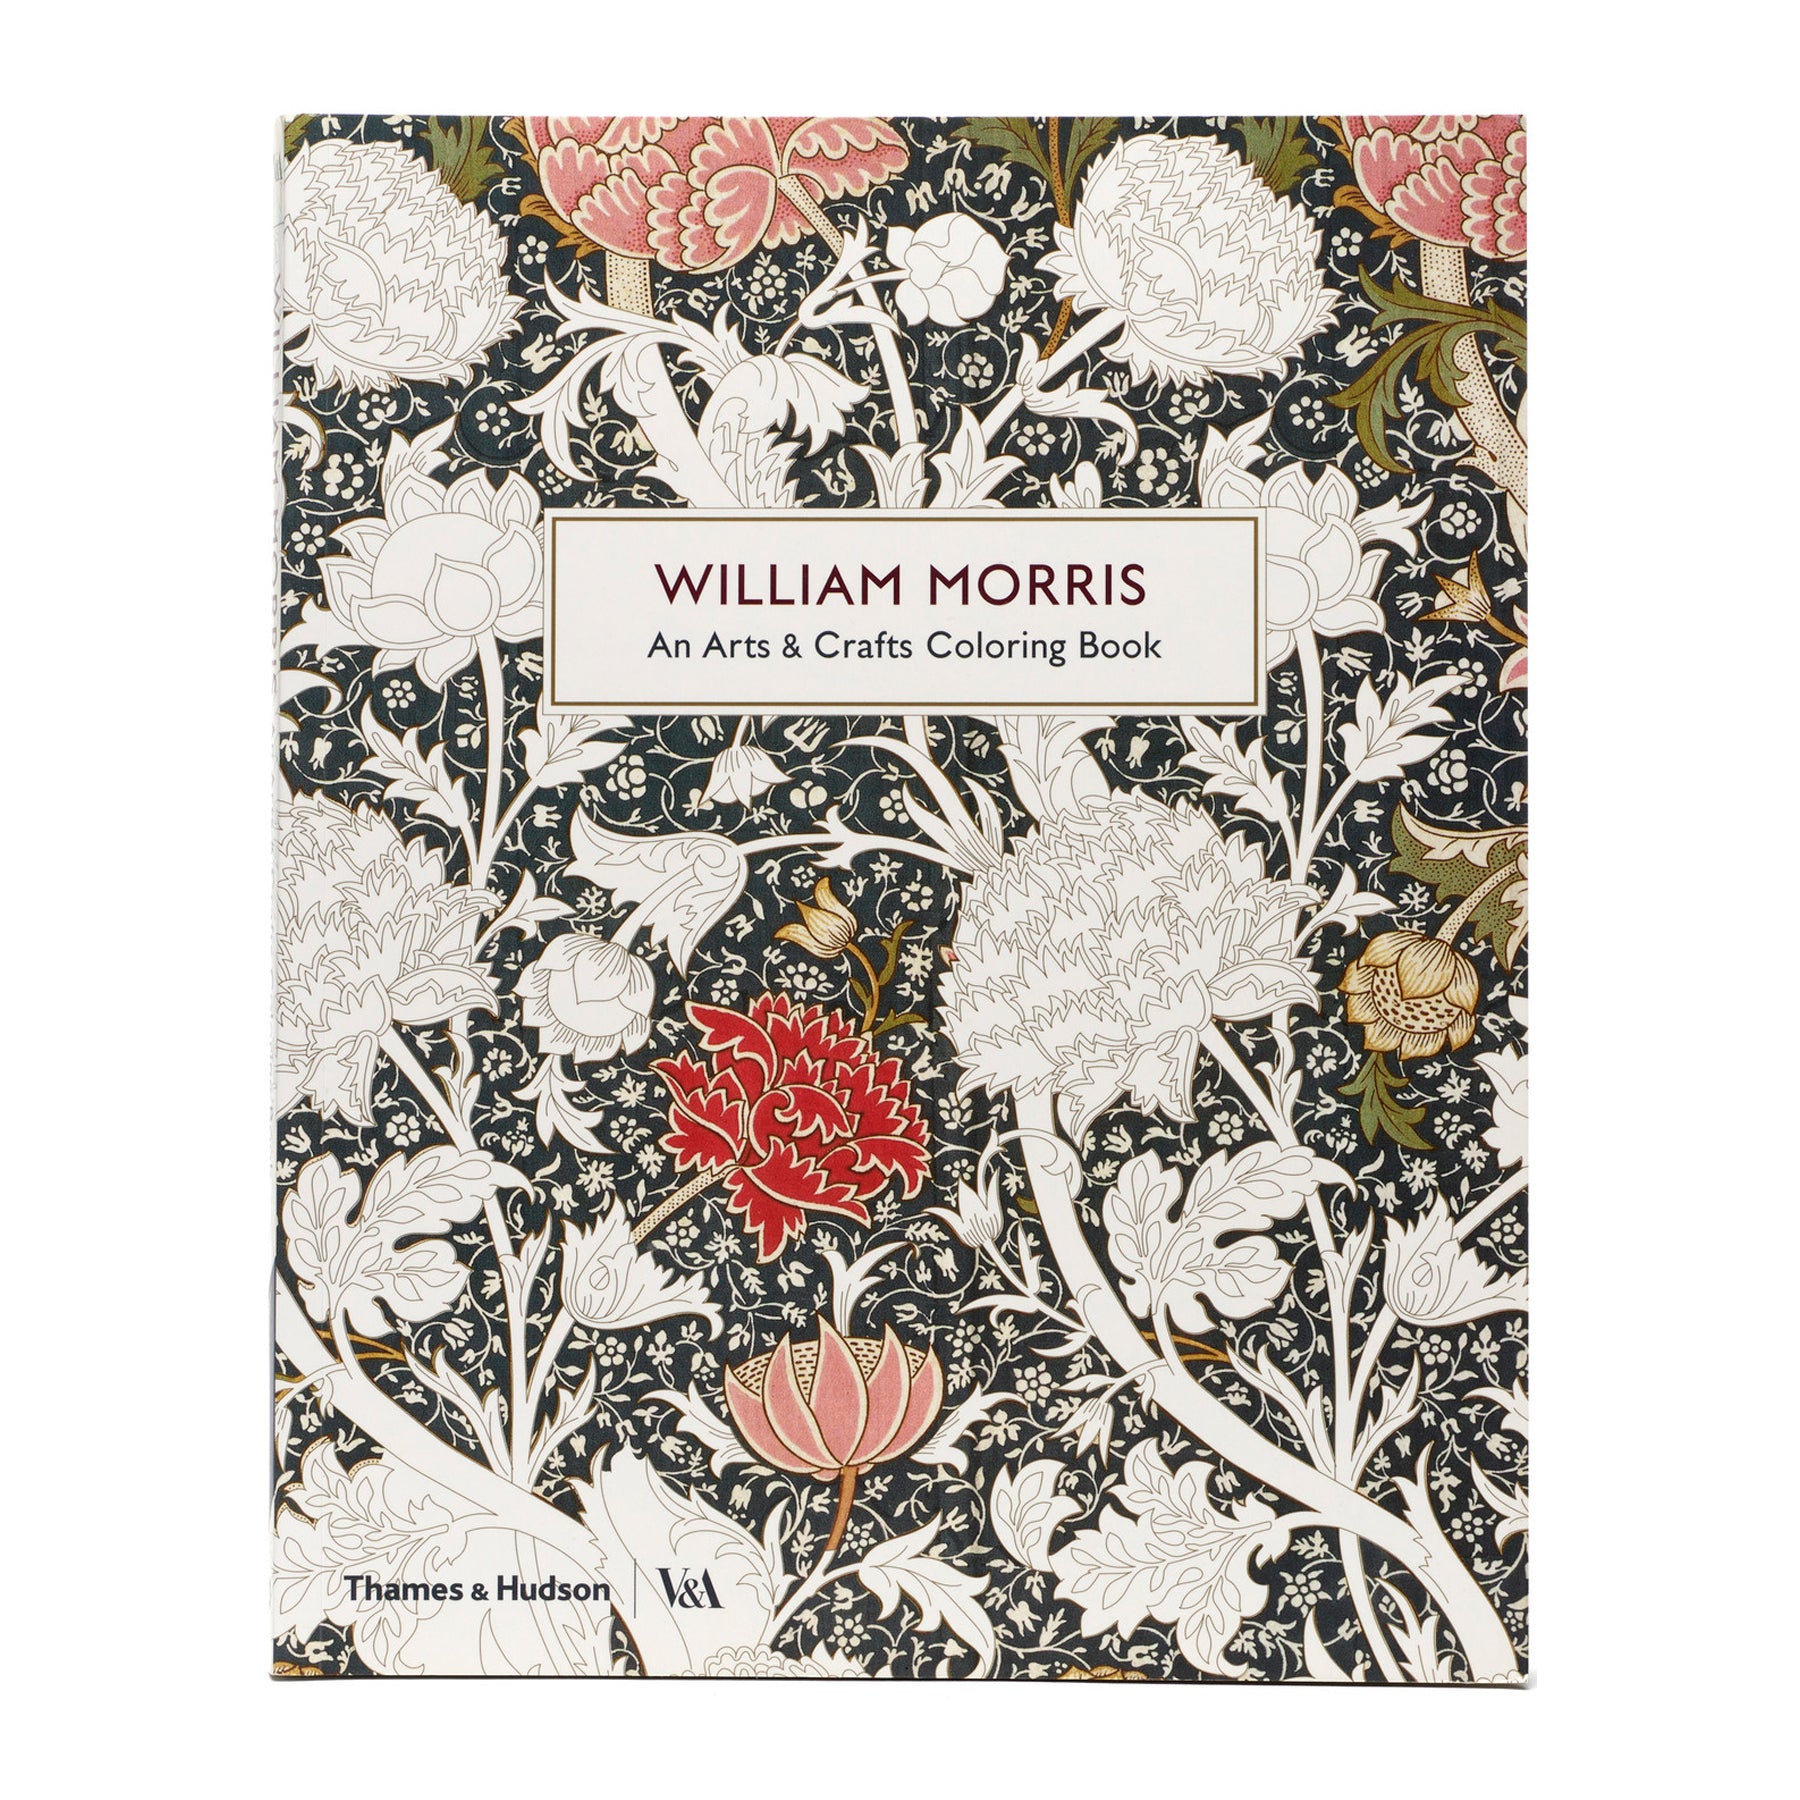 William Morris: A Lifelong Fascination with Flowers